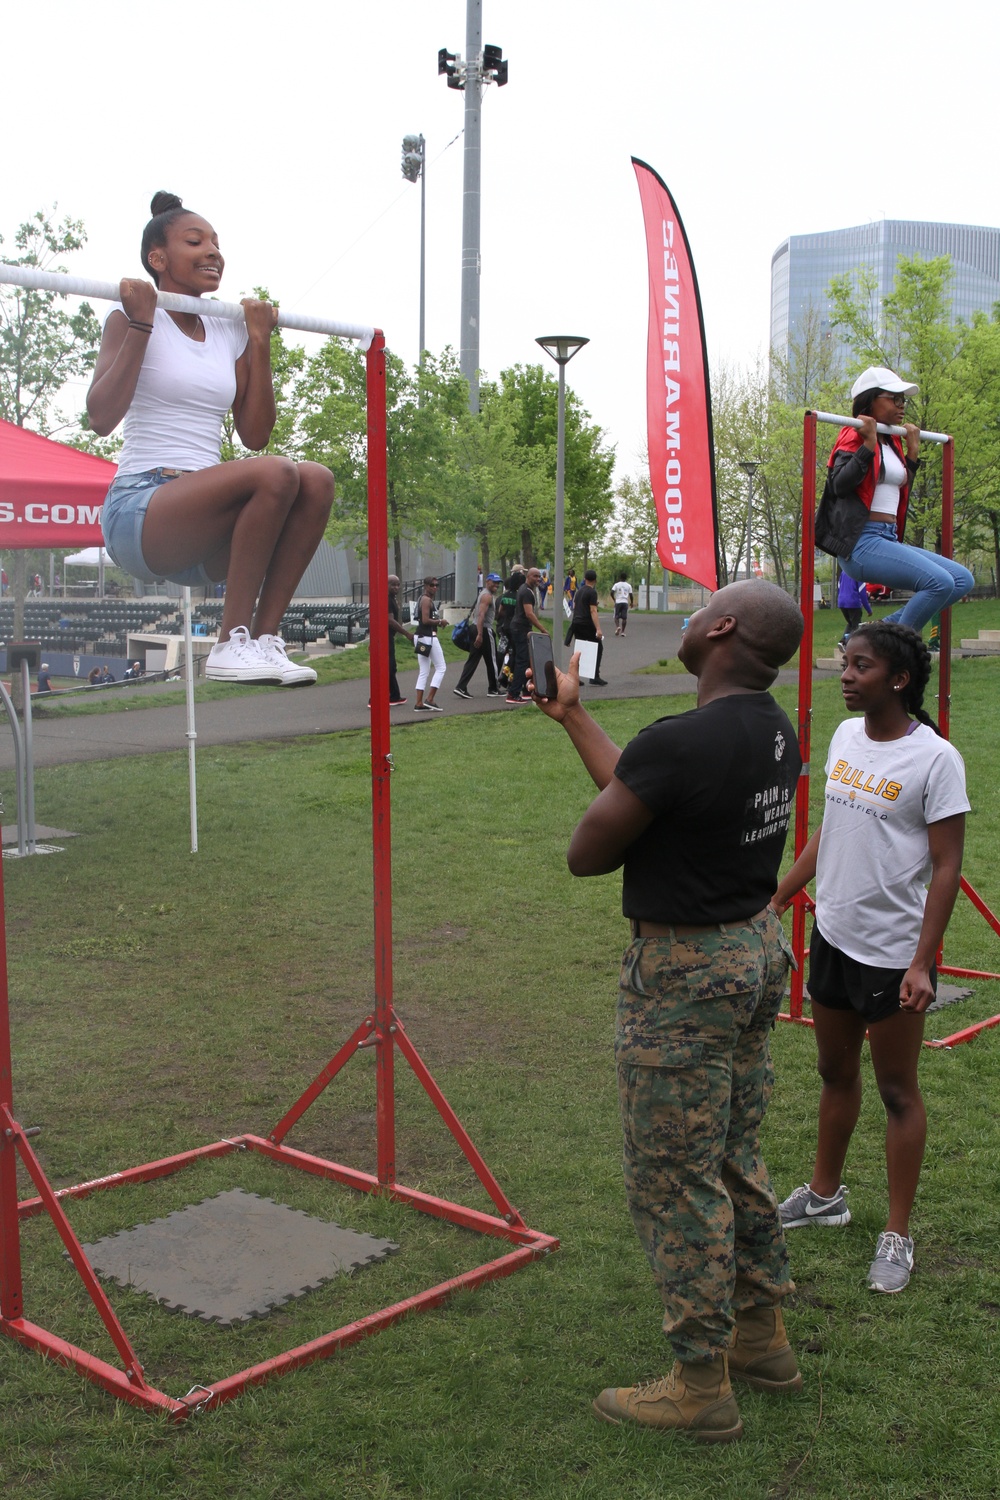 Marines engage athletes at the 2017 Penn Relays